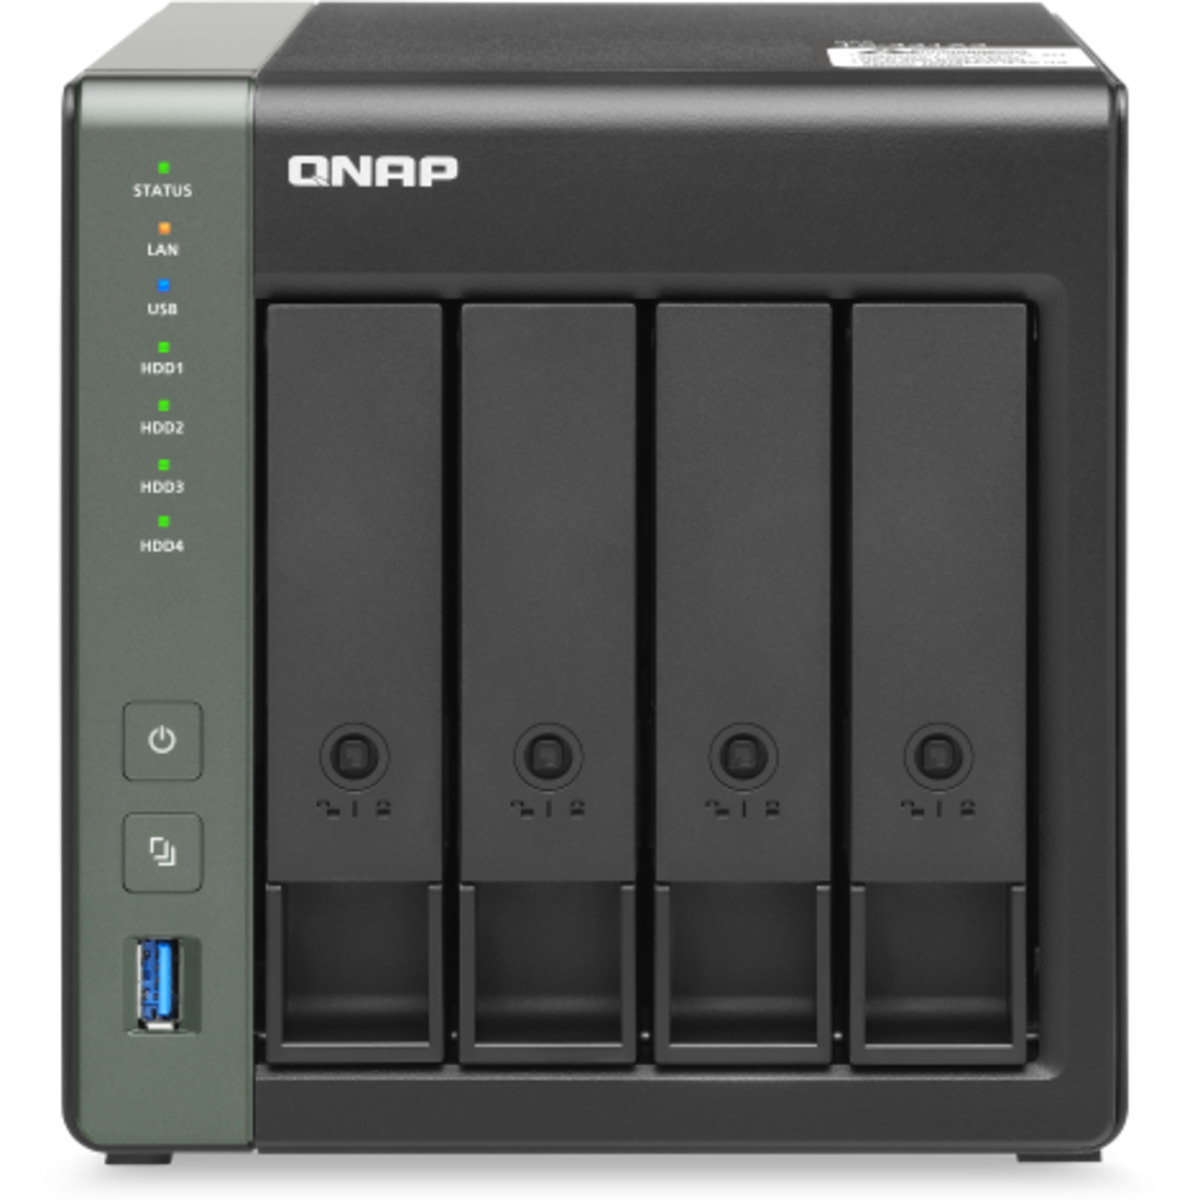 QNAP TS-431X3 32tb 4-Bay Desktop Multimedia / Power User / Business NAS - Network Attached Storage Device 4x8tb Seagate EXOS 7E10 ST8000NM017B 3.5 7200rpm SATA 6Gb/s HDD ENTERPRISE Class Drives Installed - Burn-In Tested - FREE RAM UPGRADE TS-431X3